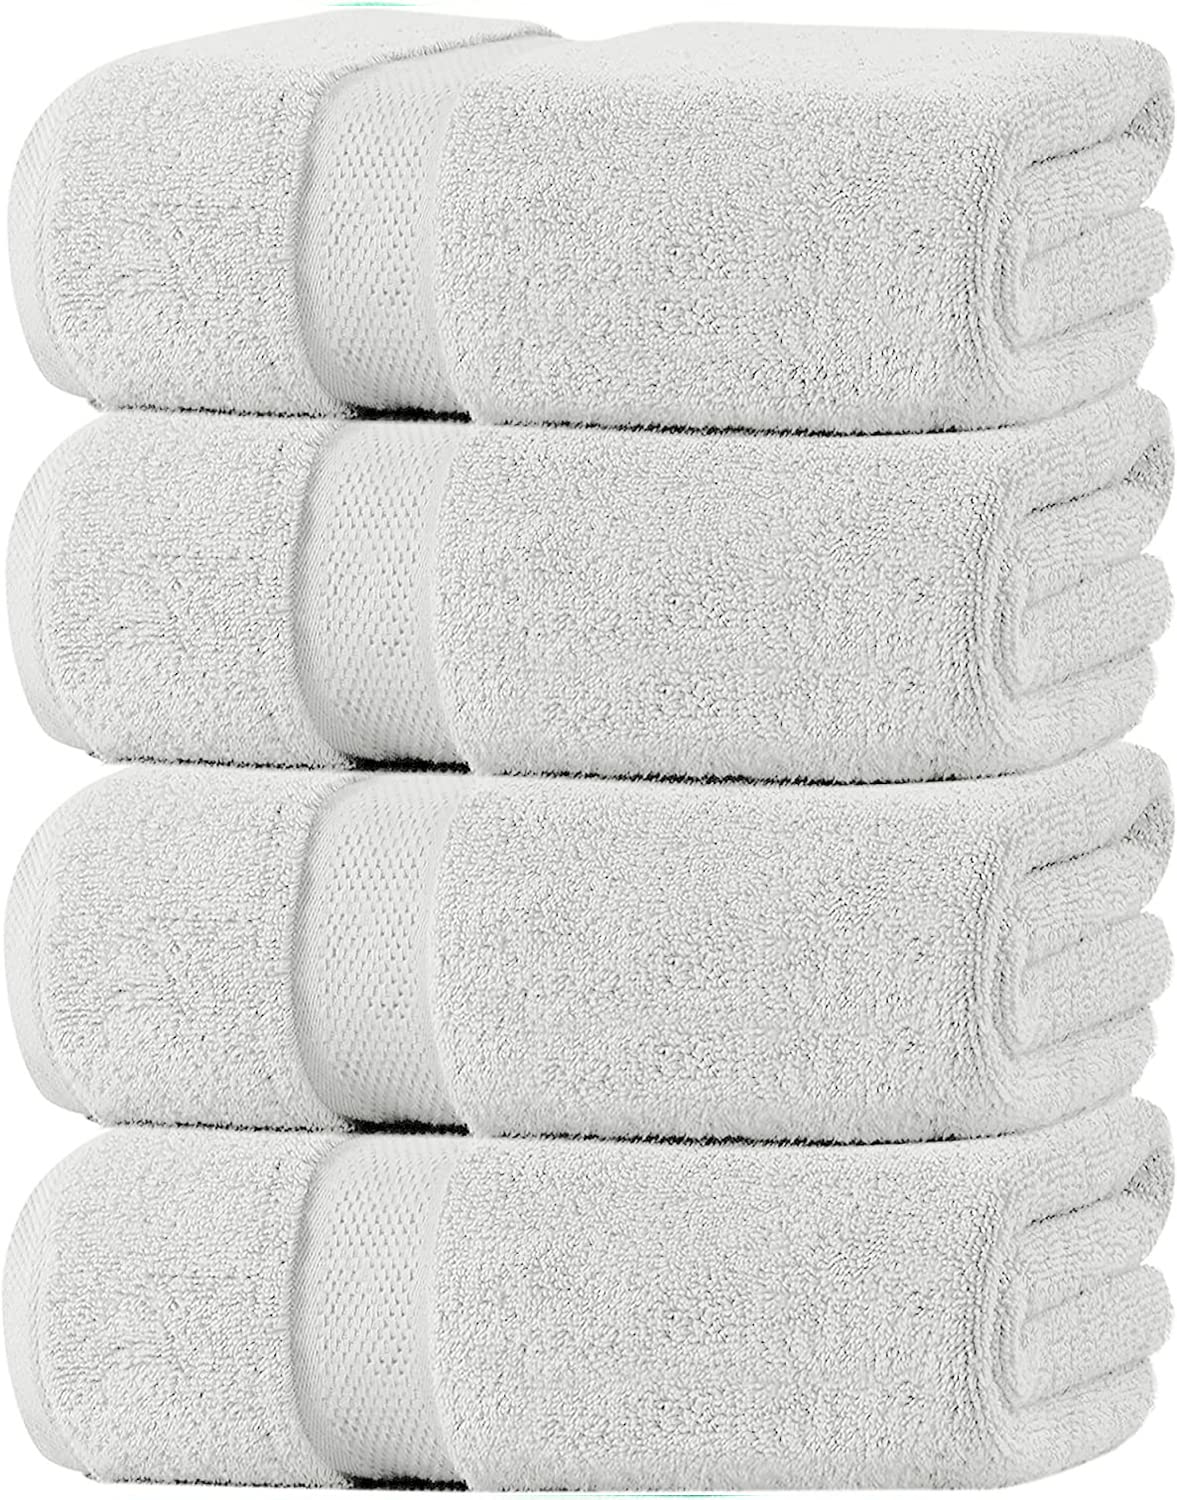 Luxury 100% Cotton Bath Towels - Pack of 4, Extra Soft & Fluffy